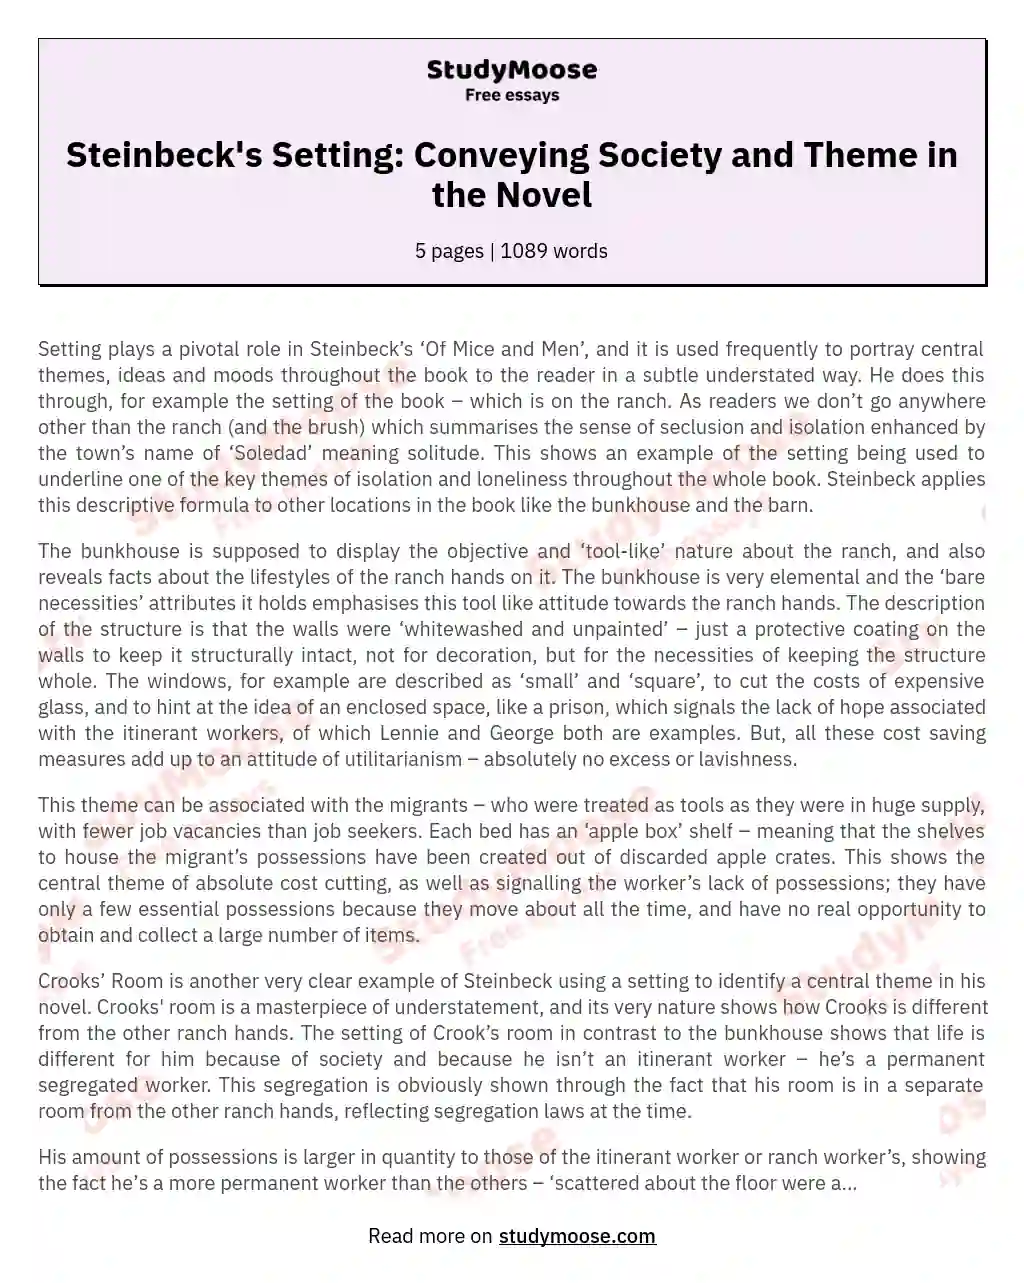 Steinbeck's Setting: Conveying Society and Theme in the Novel essay